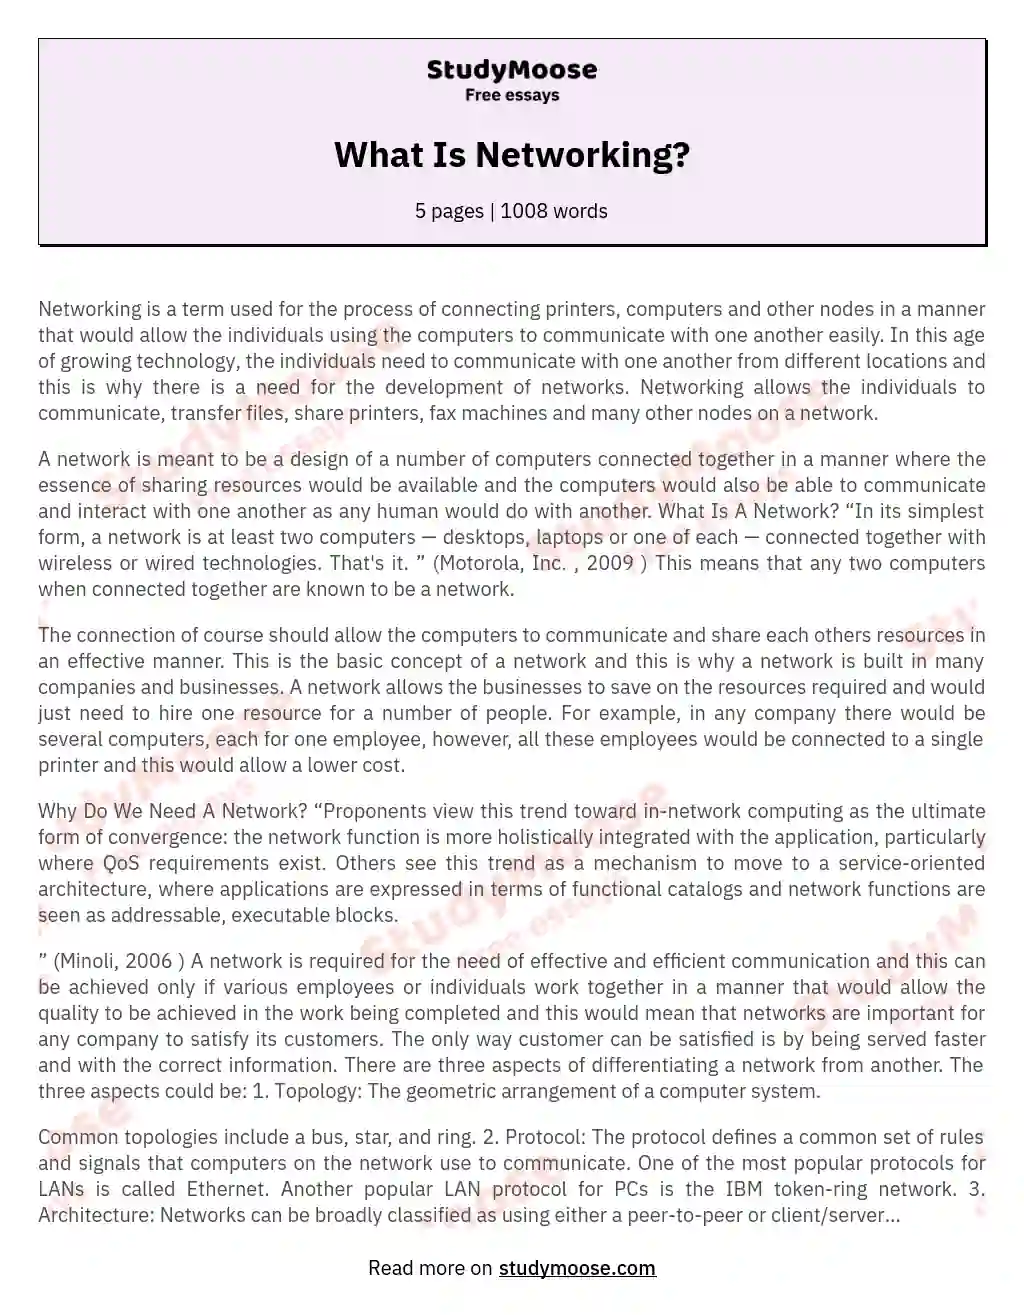 What Is Networking? essay